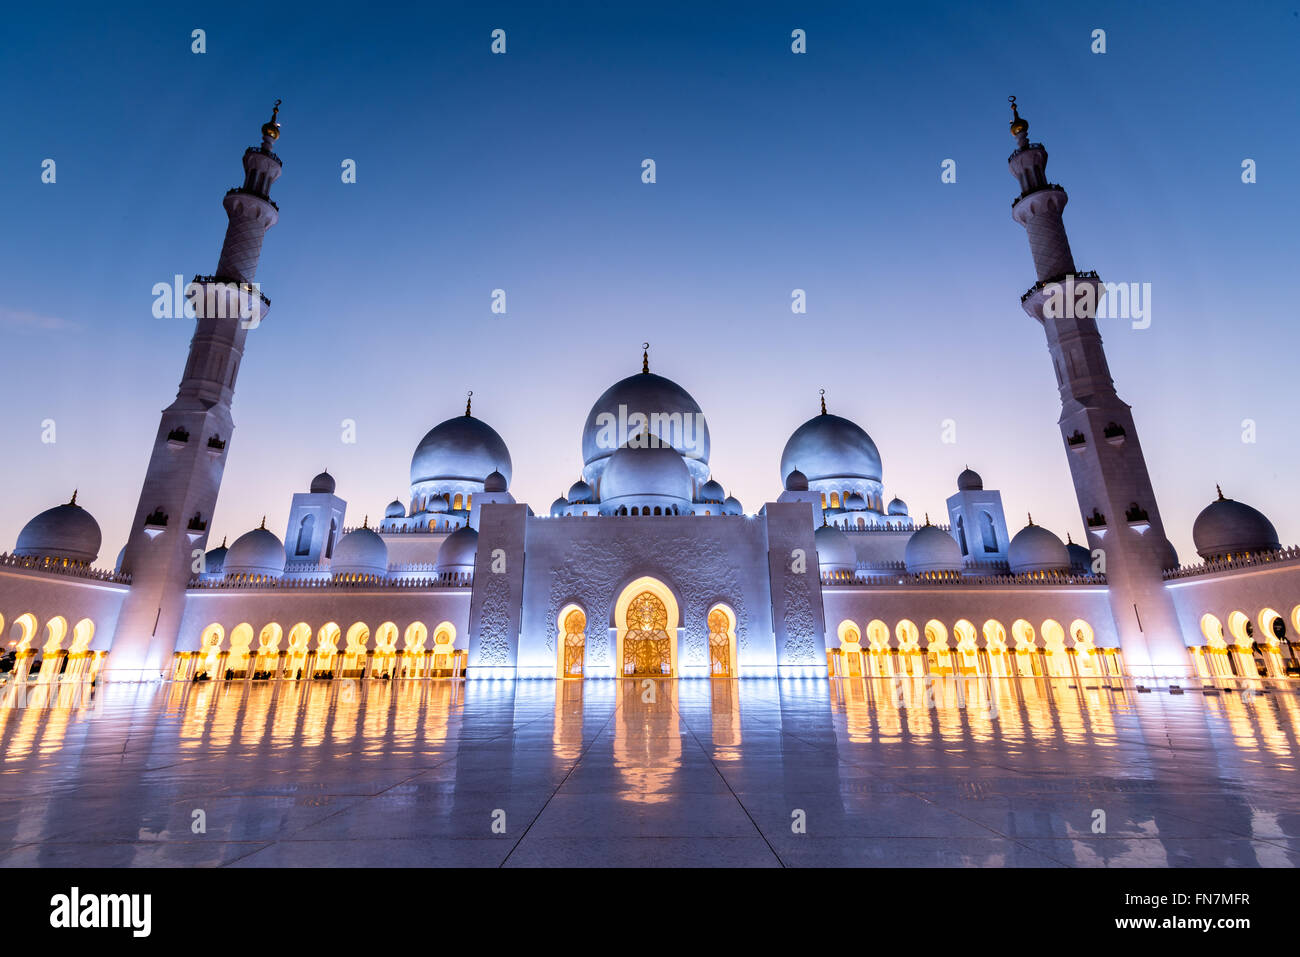 Courtyard of the Sheikh Zayed Grand Mosque in Abu Dhabi captured at sunset Stock Photo